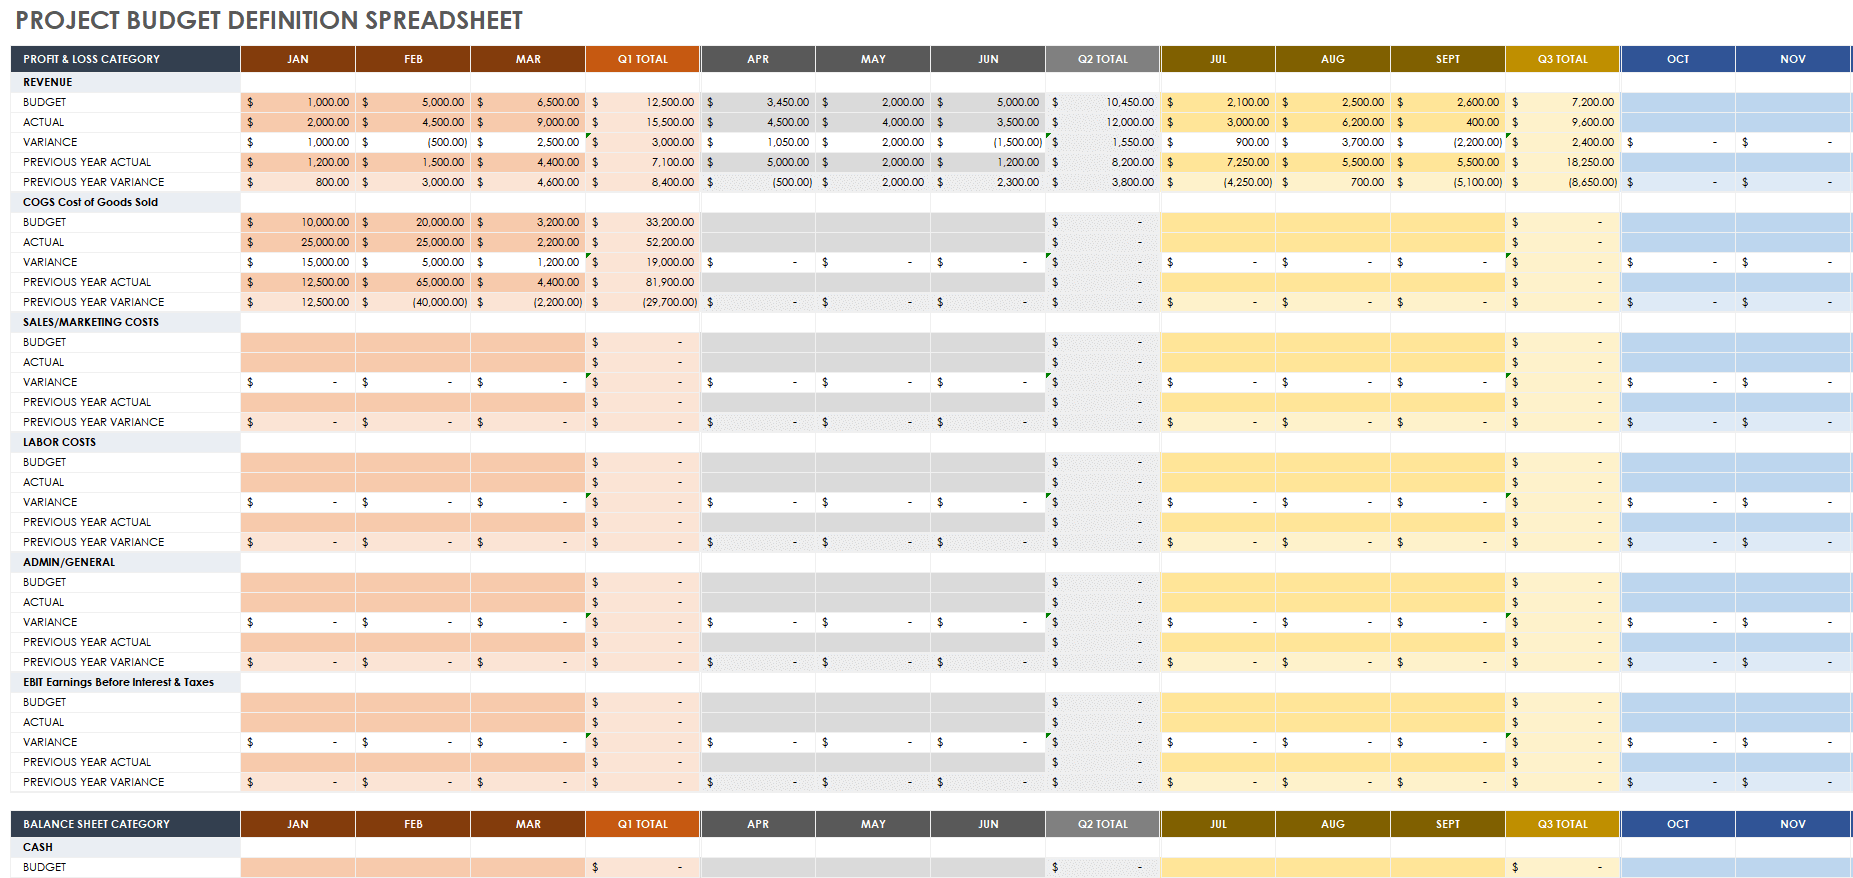 Project Budget Definition Spreadsheet